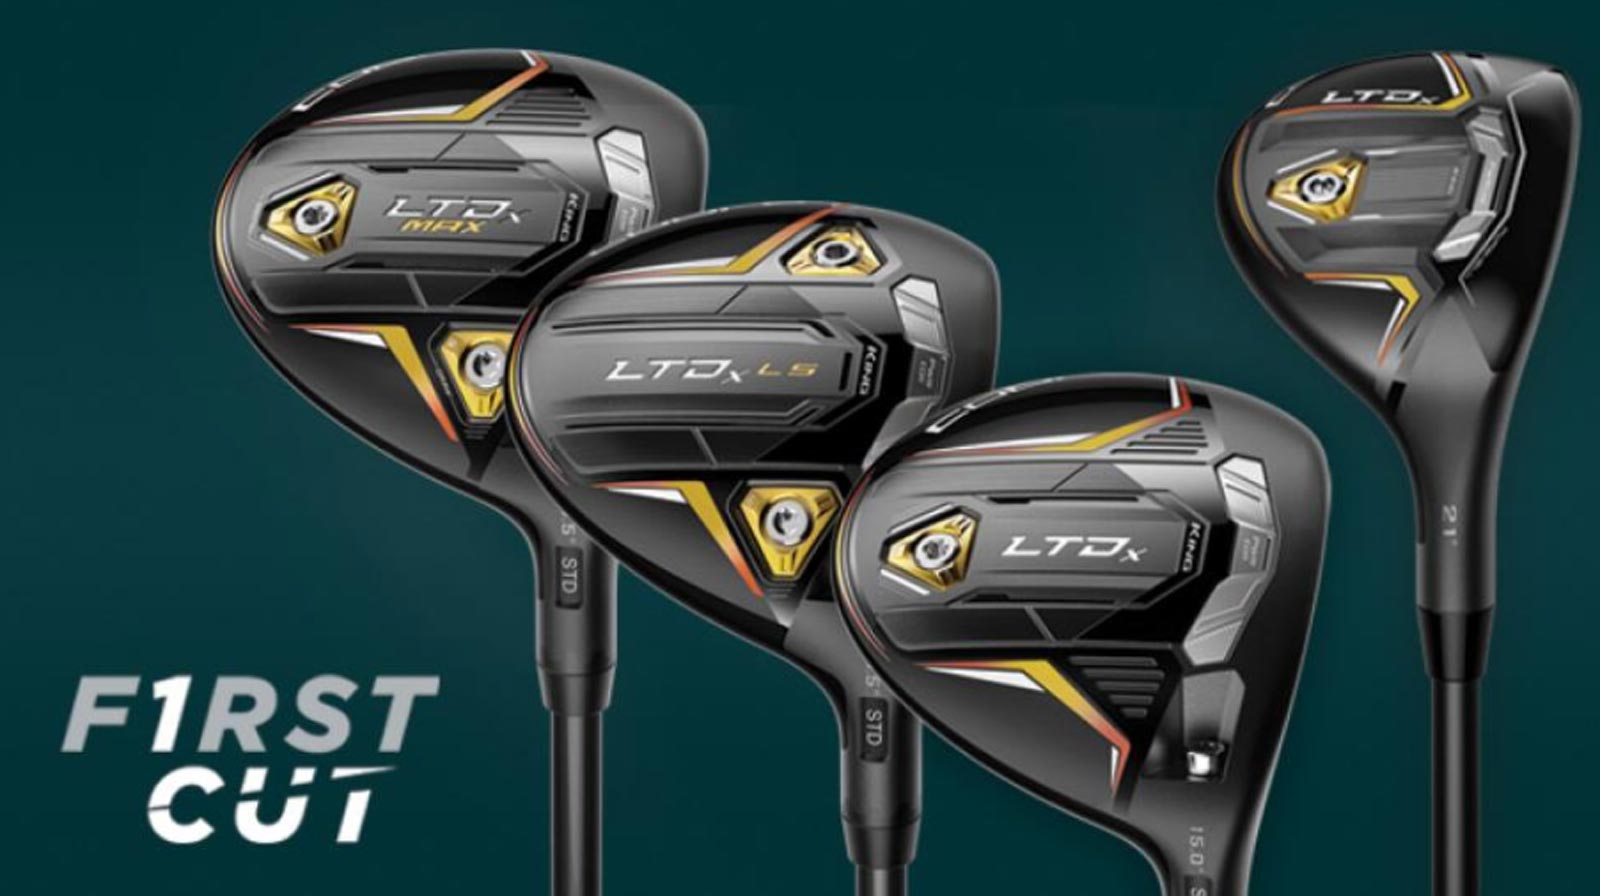 Cobra LTDx fairway woods, hybrids What you need to know Australian Golf Digest